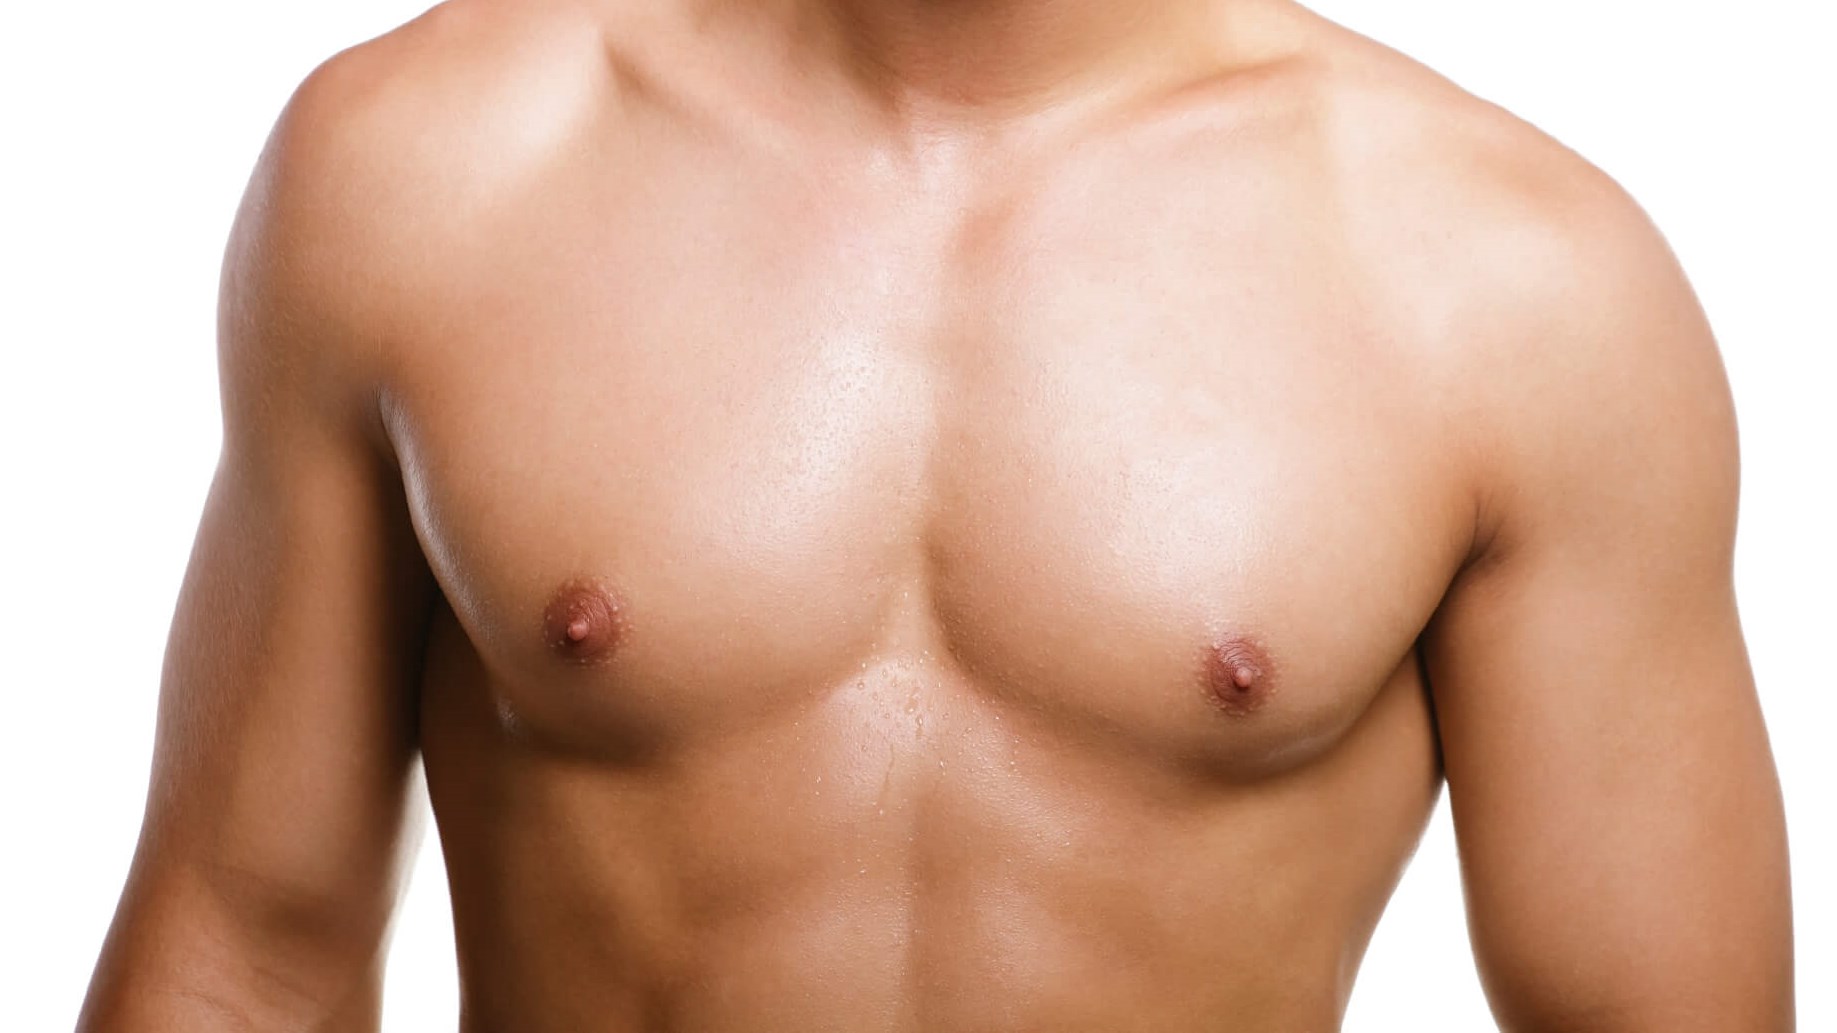 My right nipple is bigger than the left. I'm 19 and male. I don't